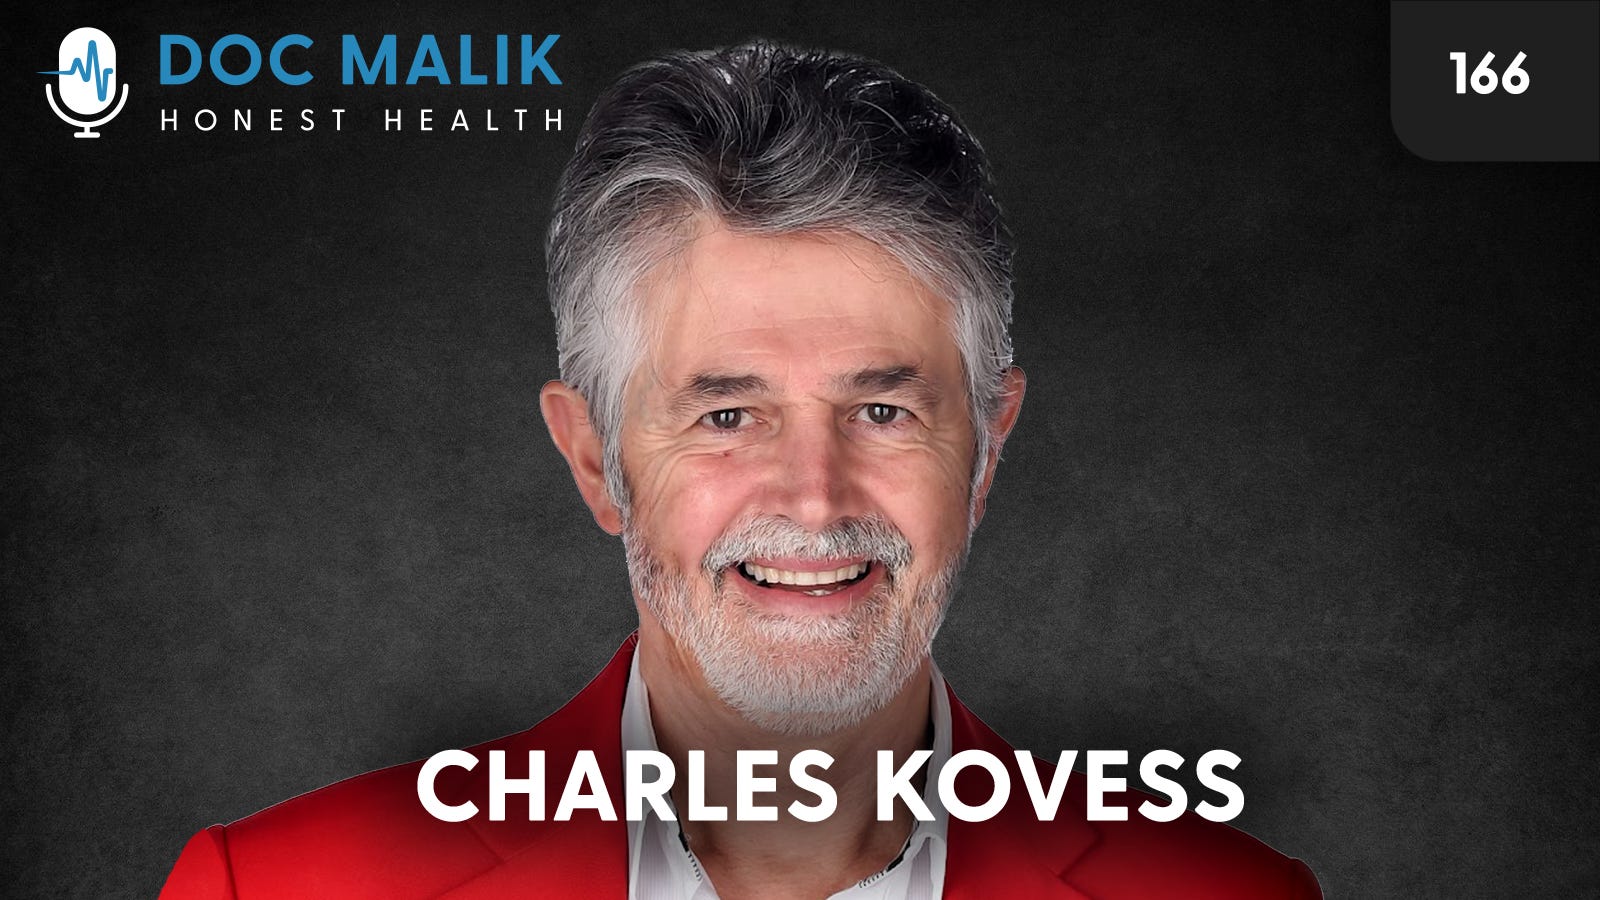 #166 - Charles Kovess Executive Coach Discusses Freedom, Hemp and CBD Oil